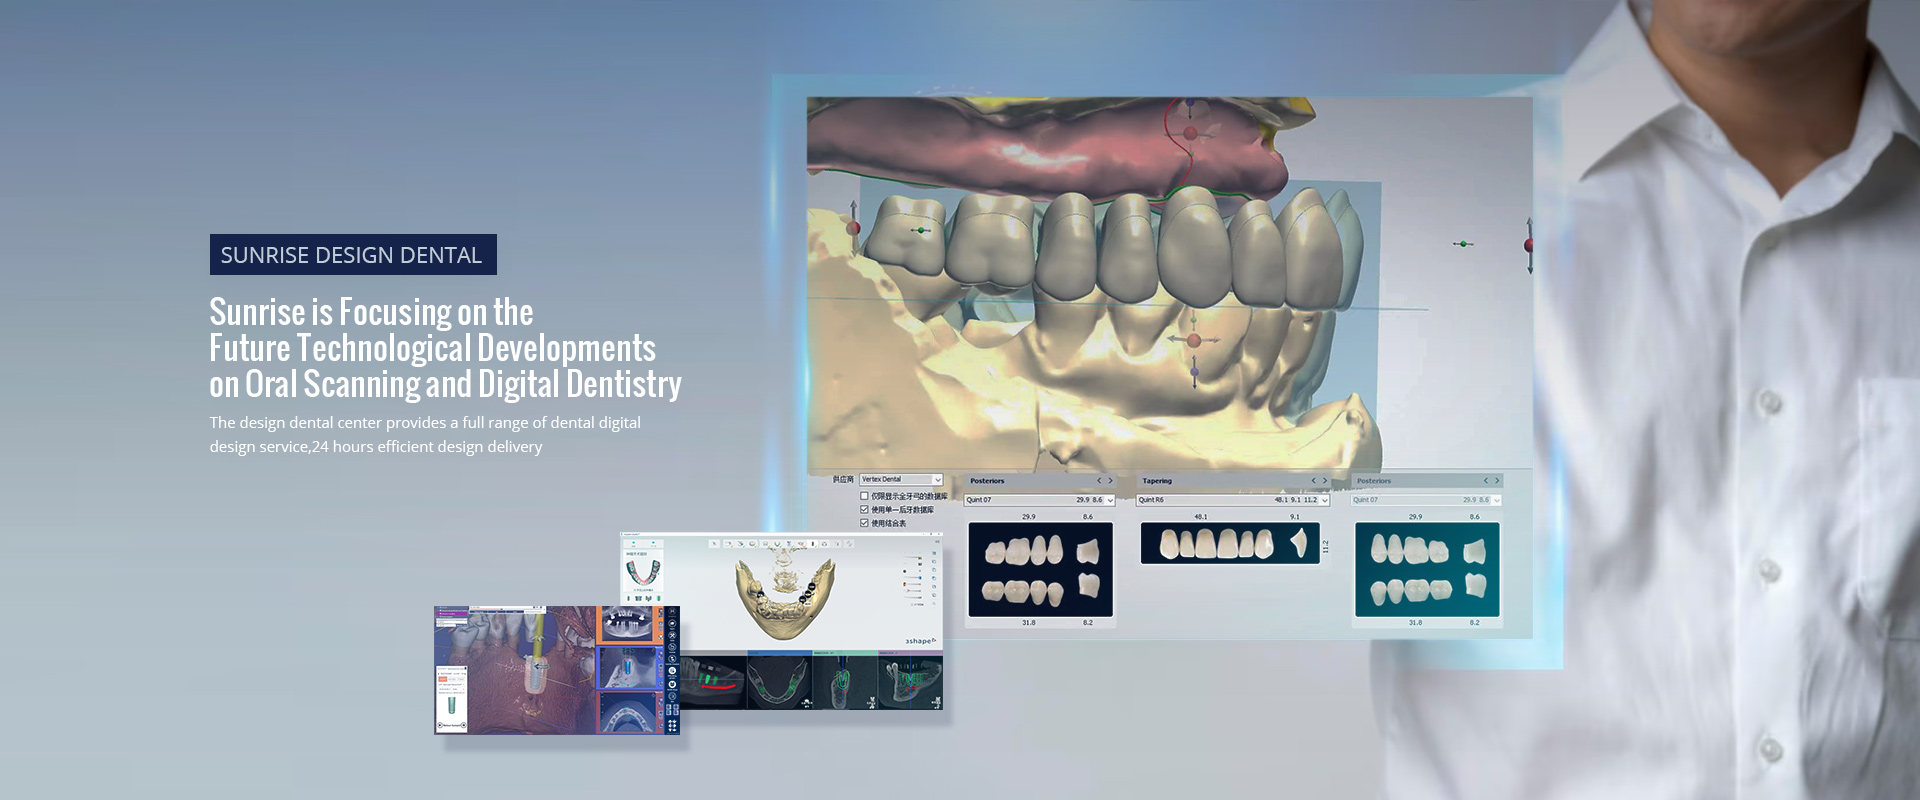 Sunrise is Focusing on the Future Technological Developments on Oral Scanning and Digital Dentistry